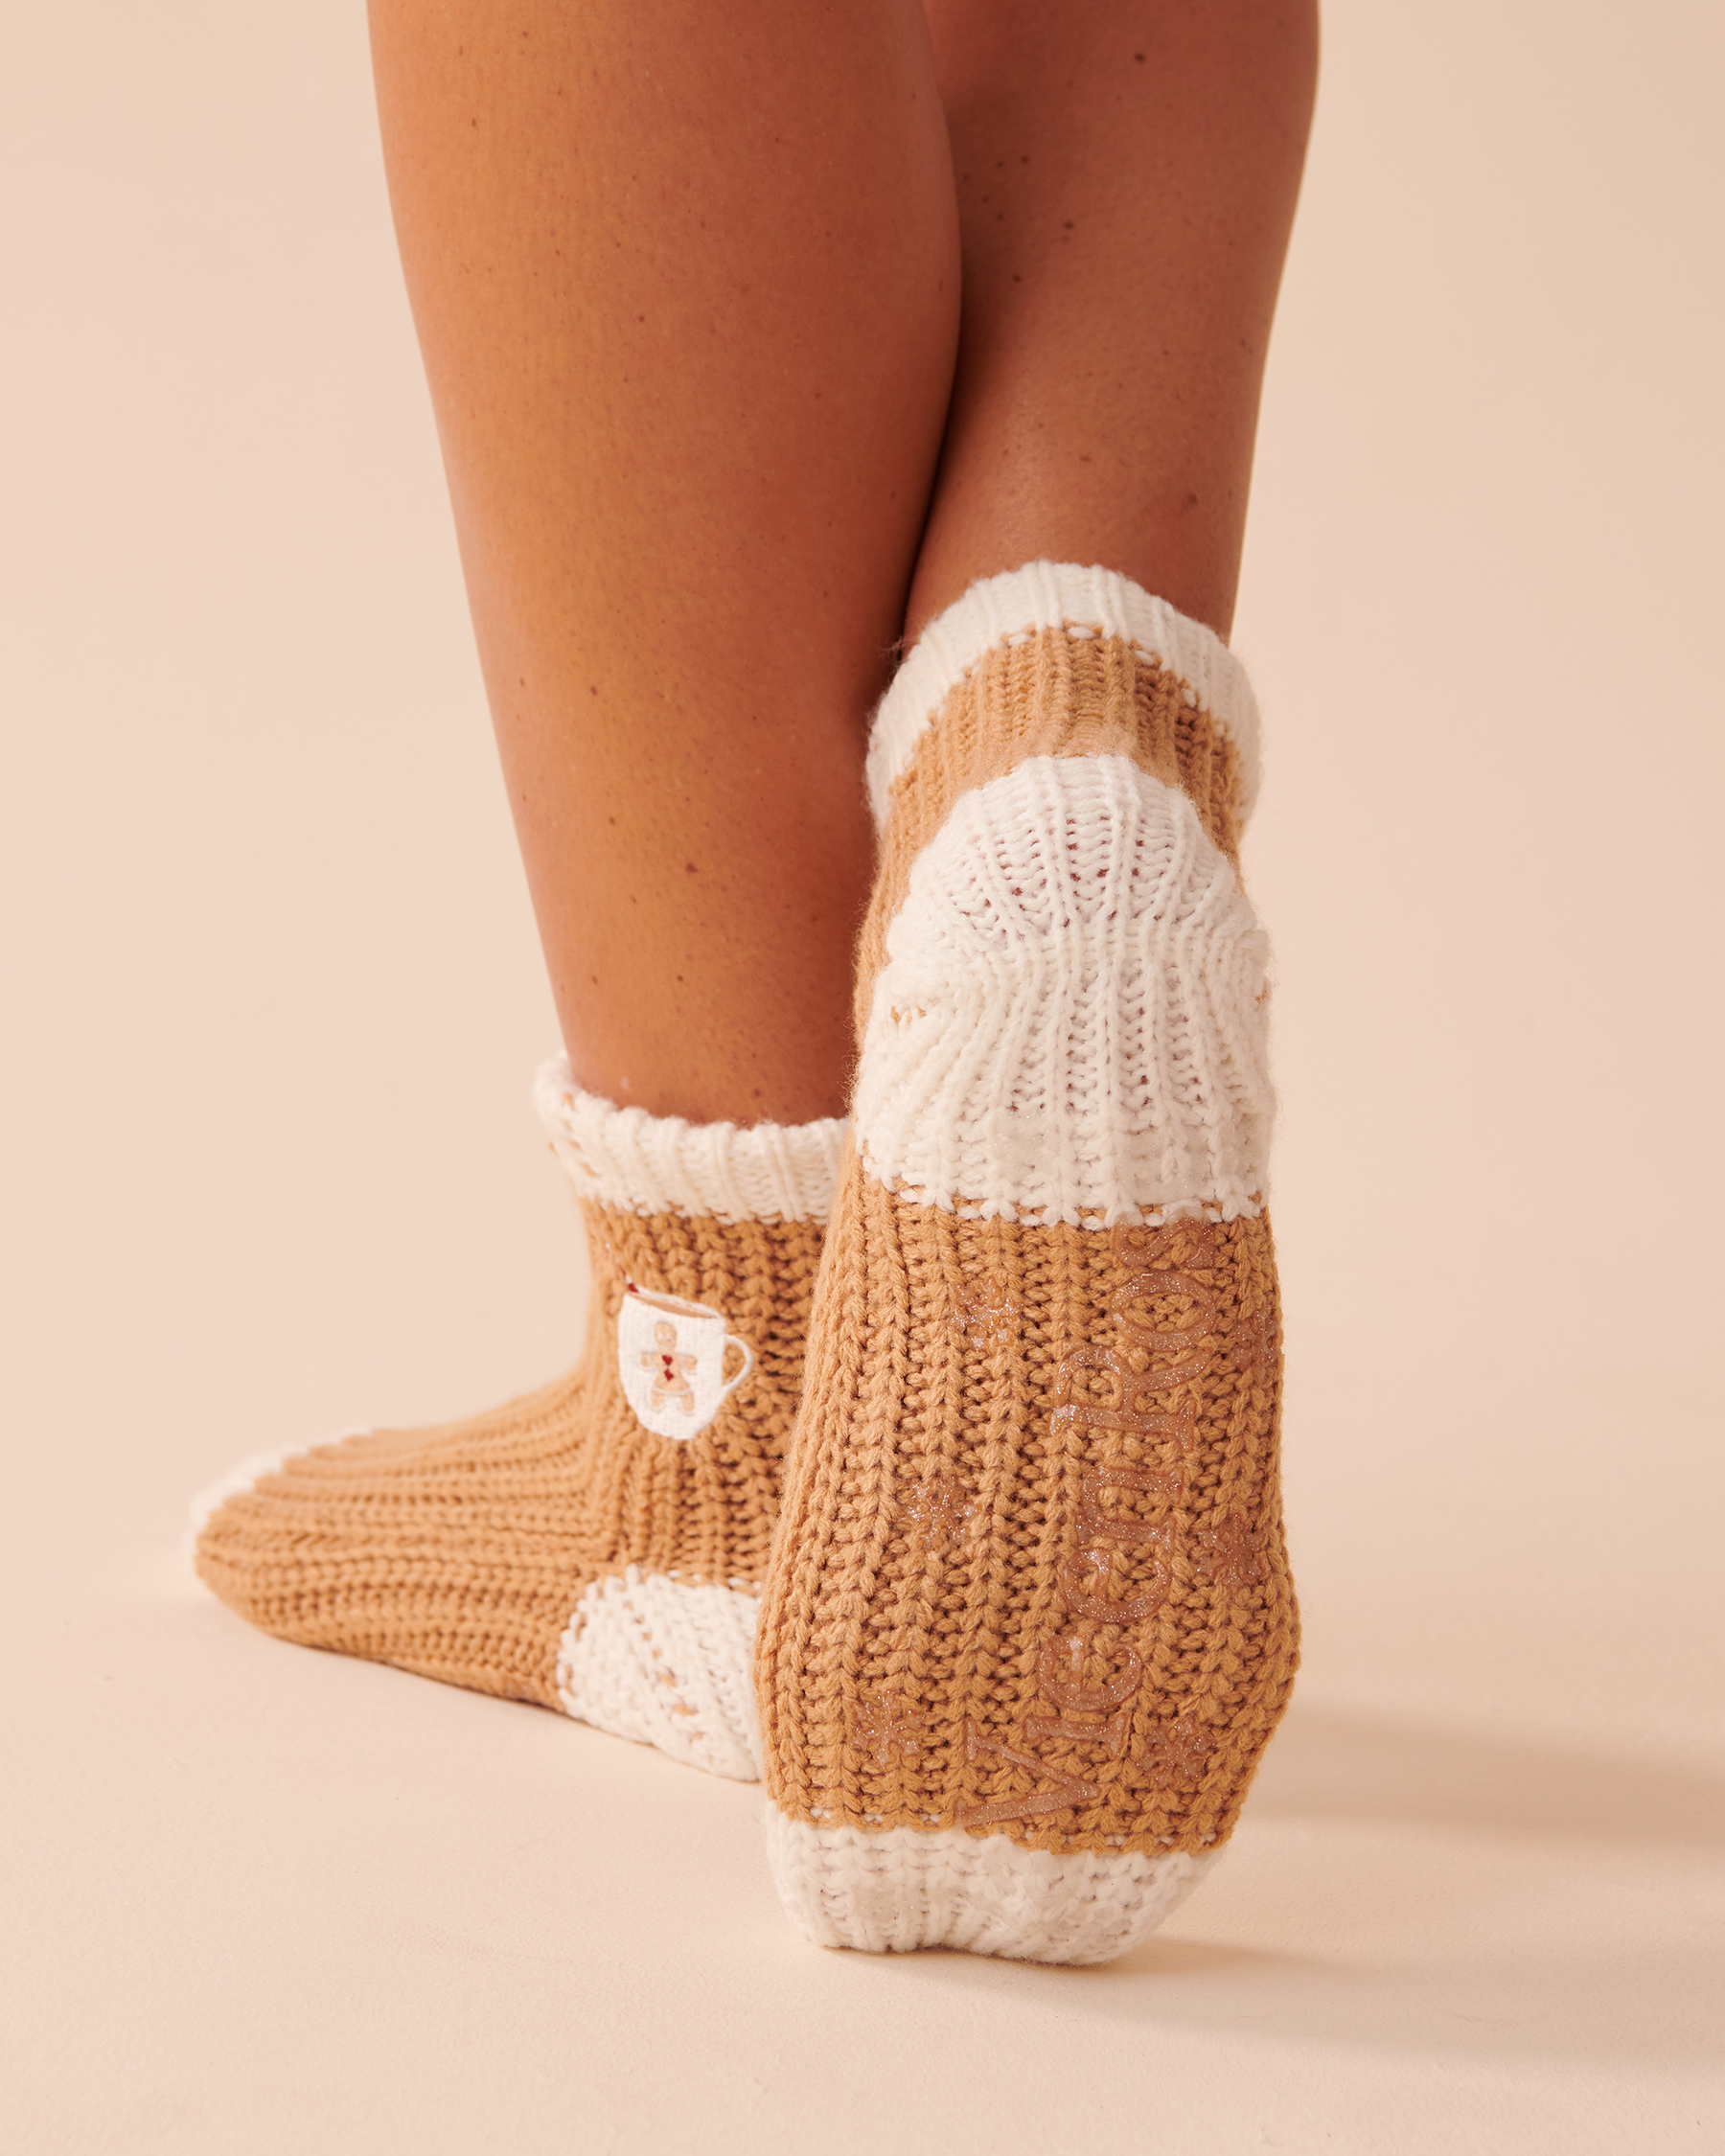 LA VIE EN ROSE Knitted Socks with Winter Embroidery Salted Caramel 40700295 - View2